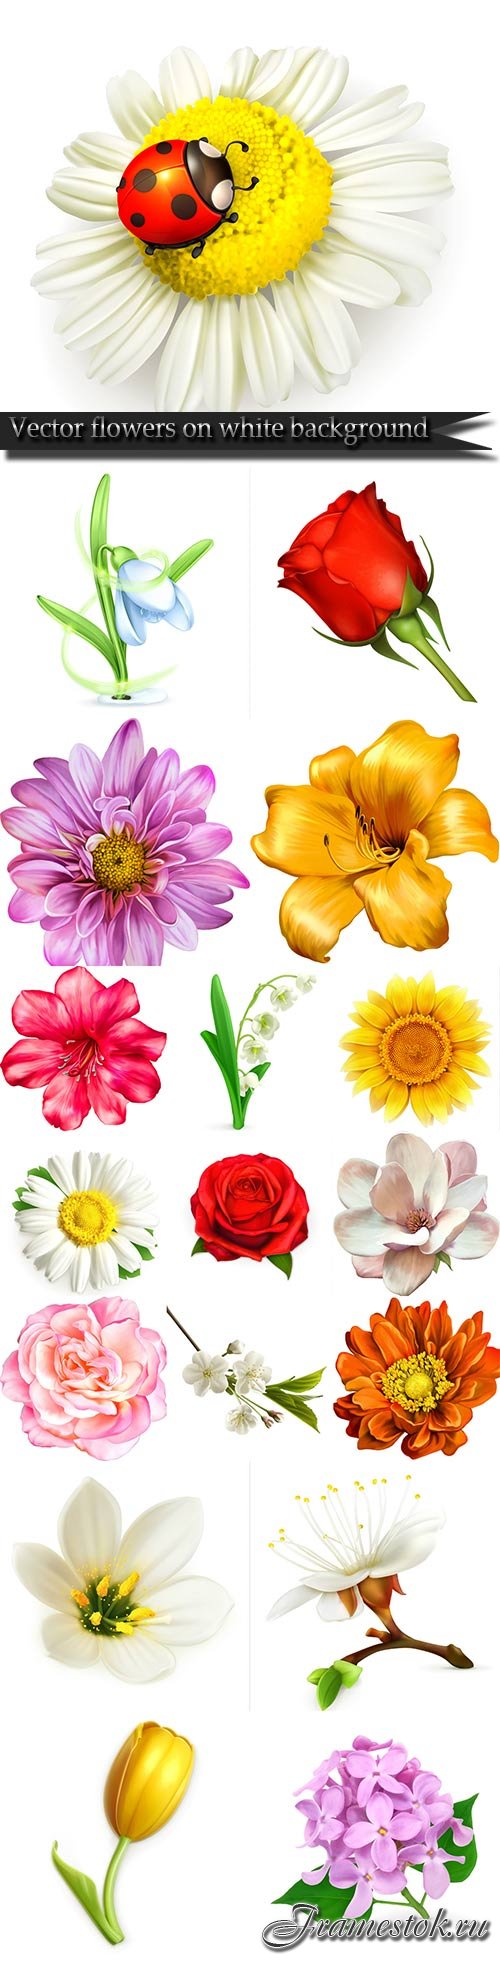 Vector flowers on white background